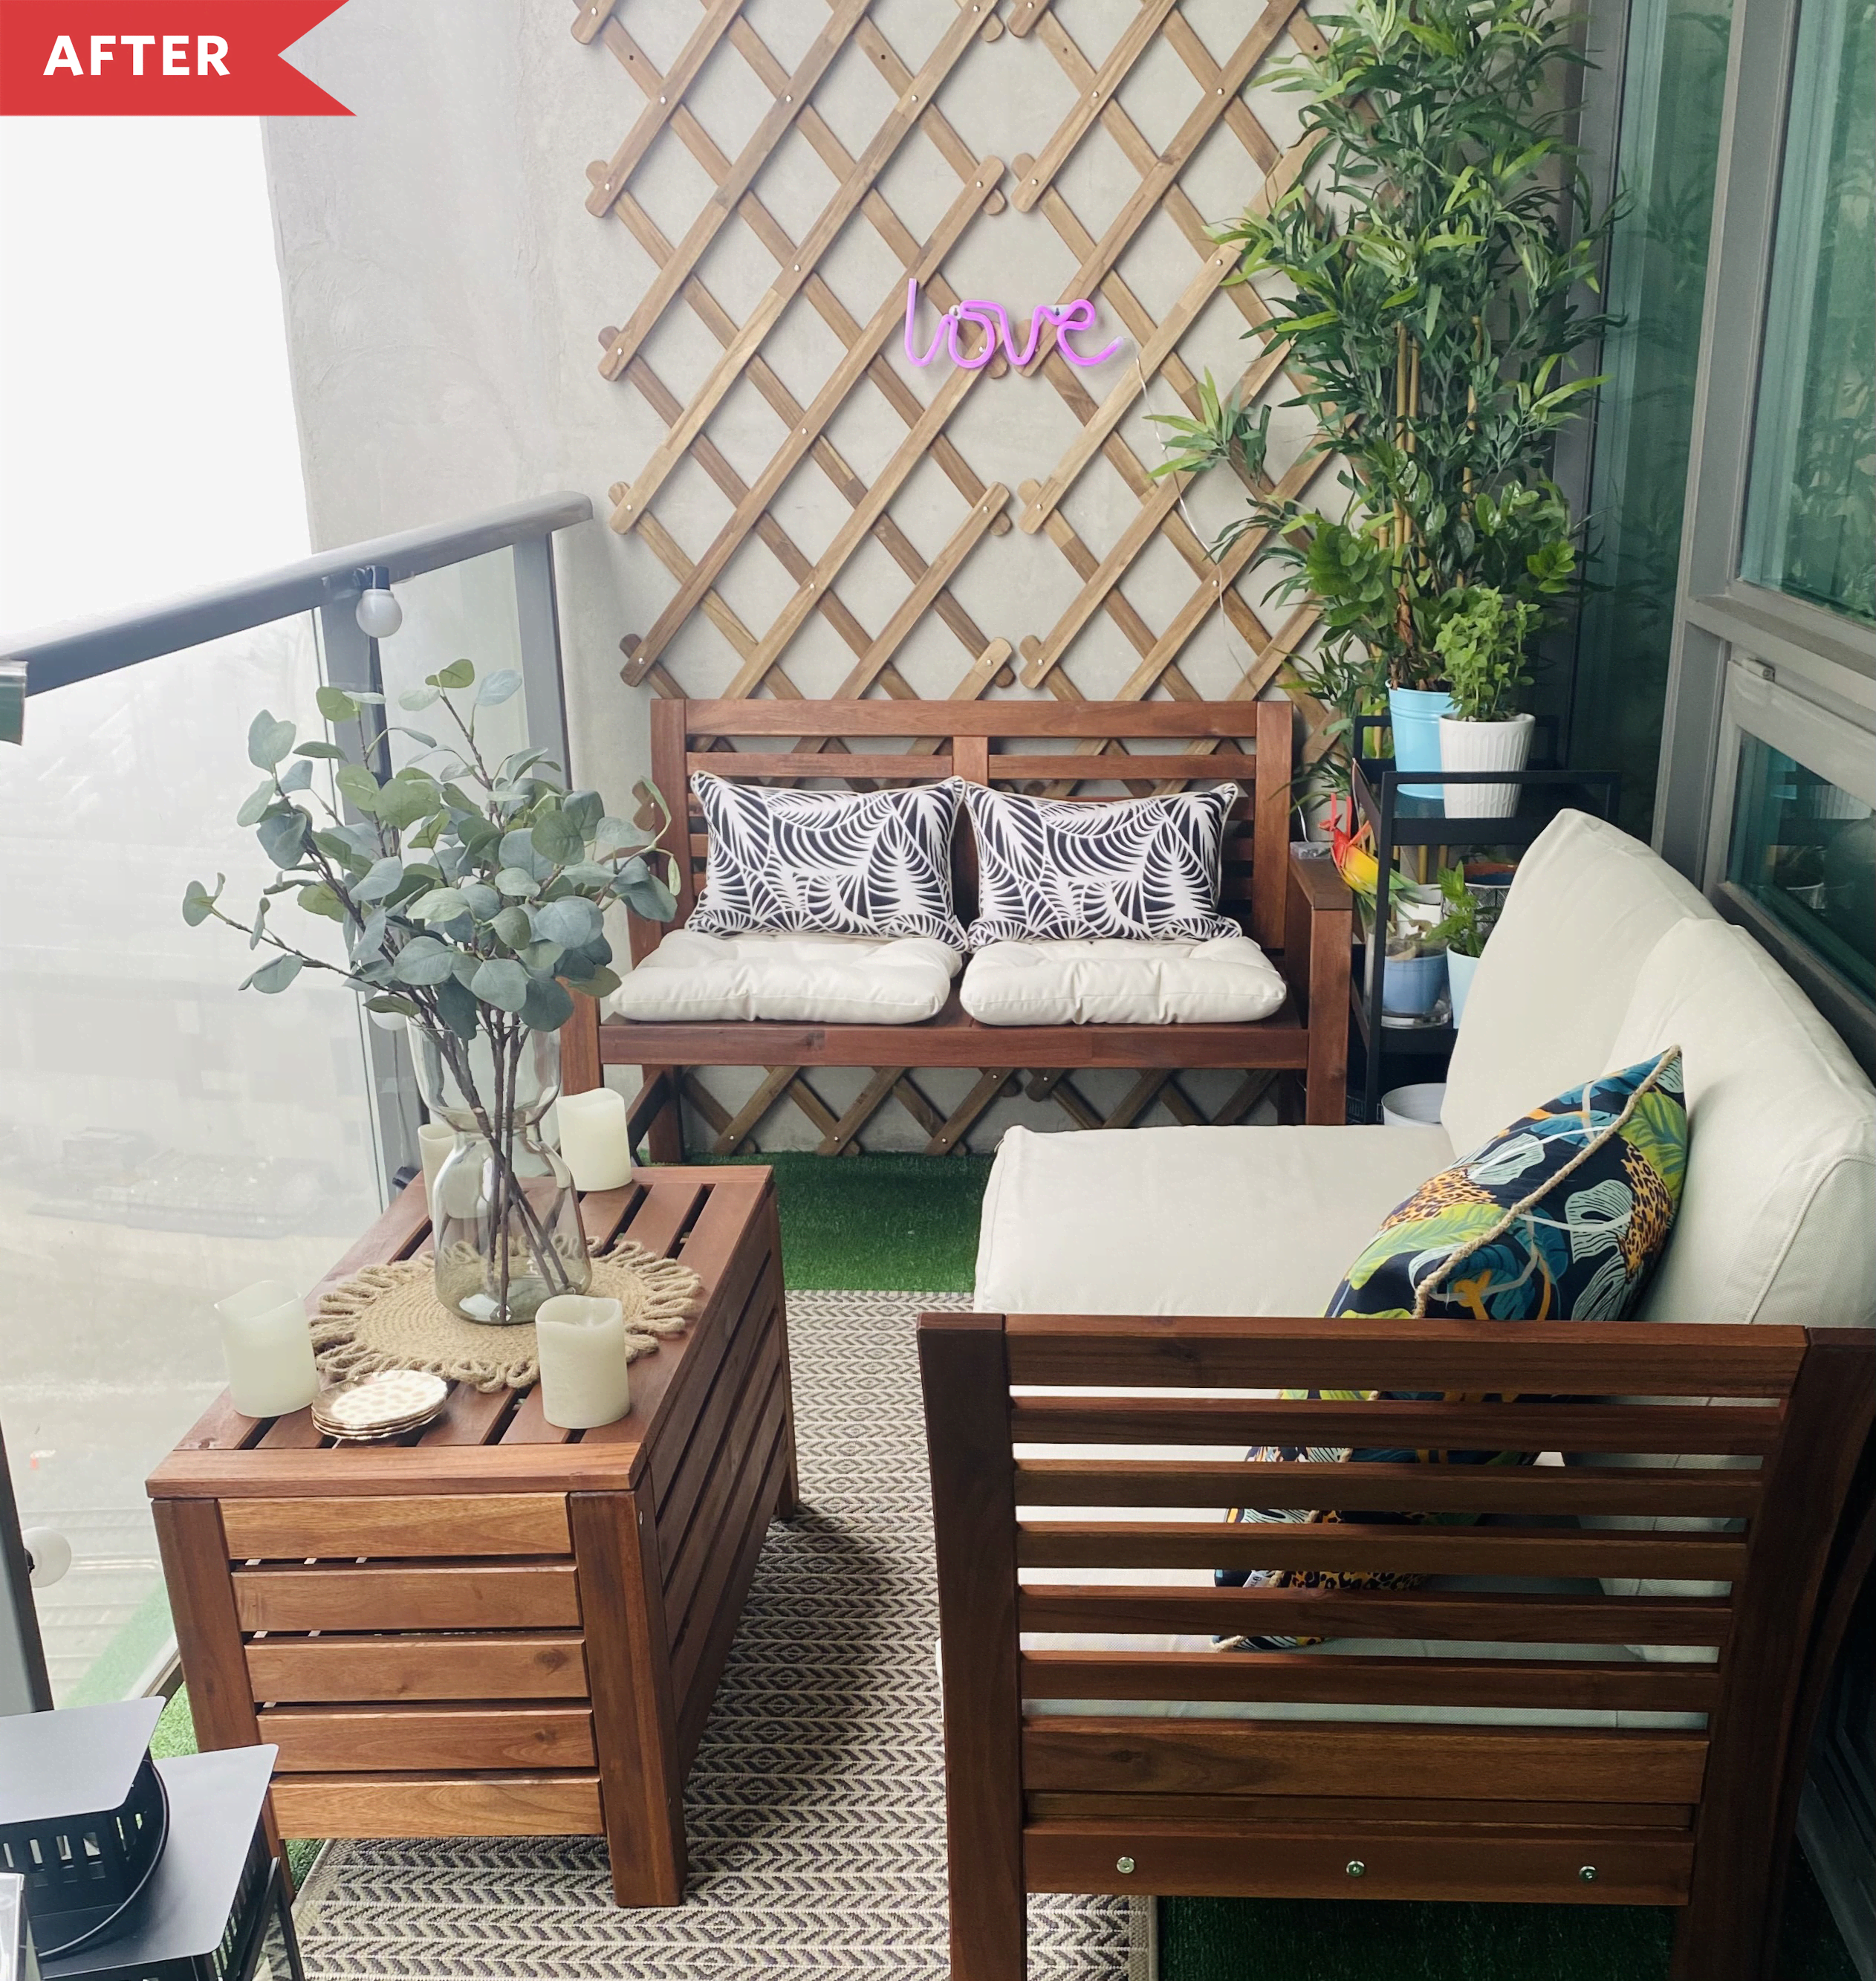 21 Best Balcony Ideas - How to Decorate a Small Balcony | Apartment Therapy